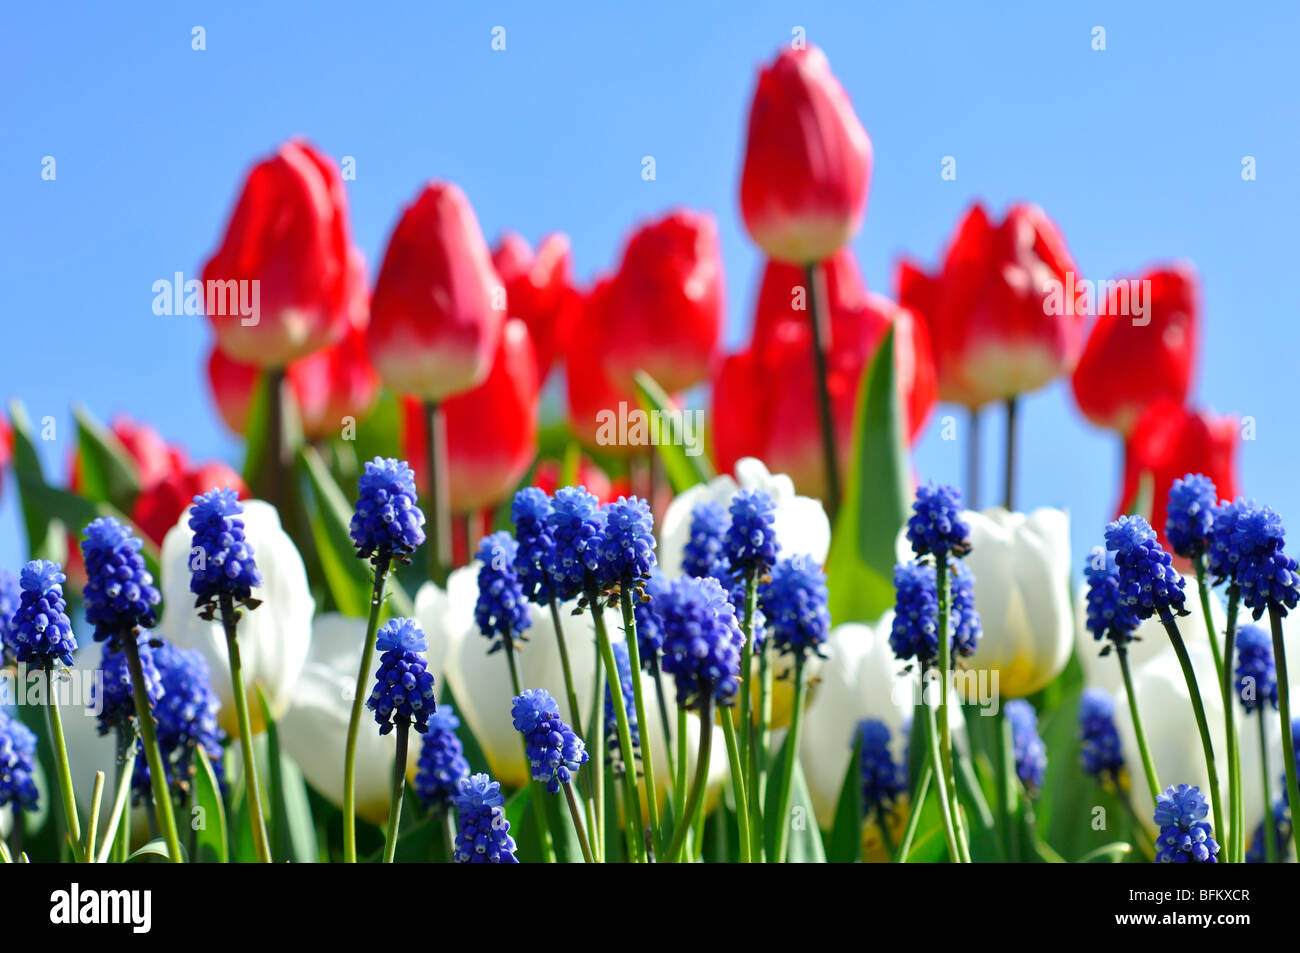 Red tulips and blue bells against blue sky Stock Photo